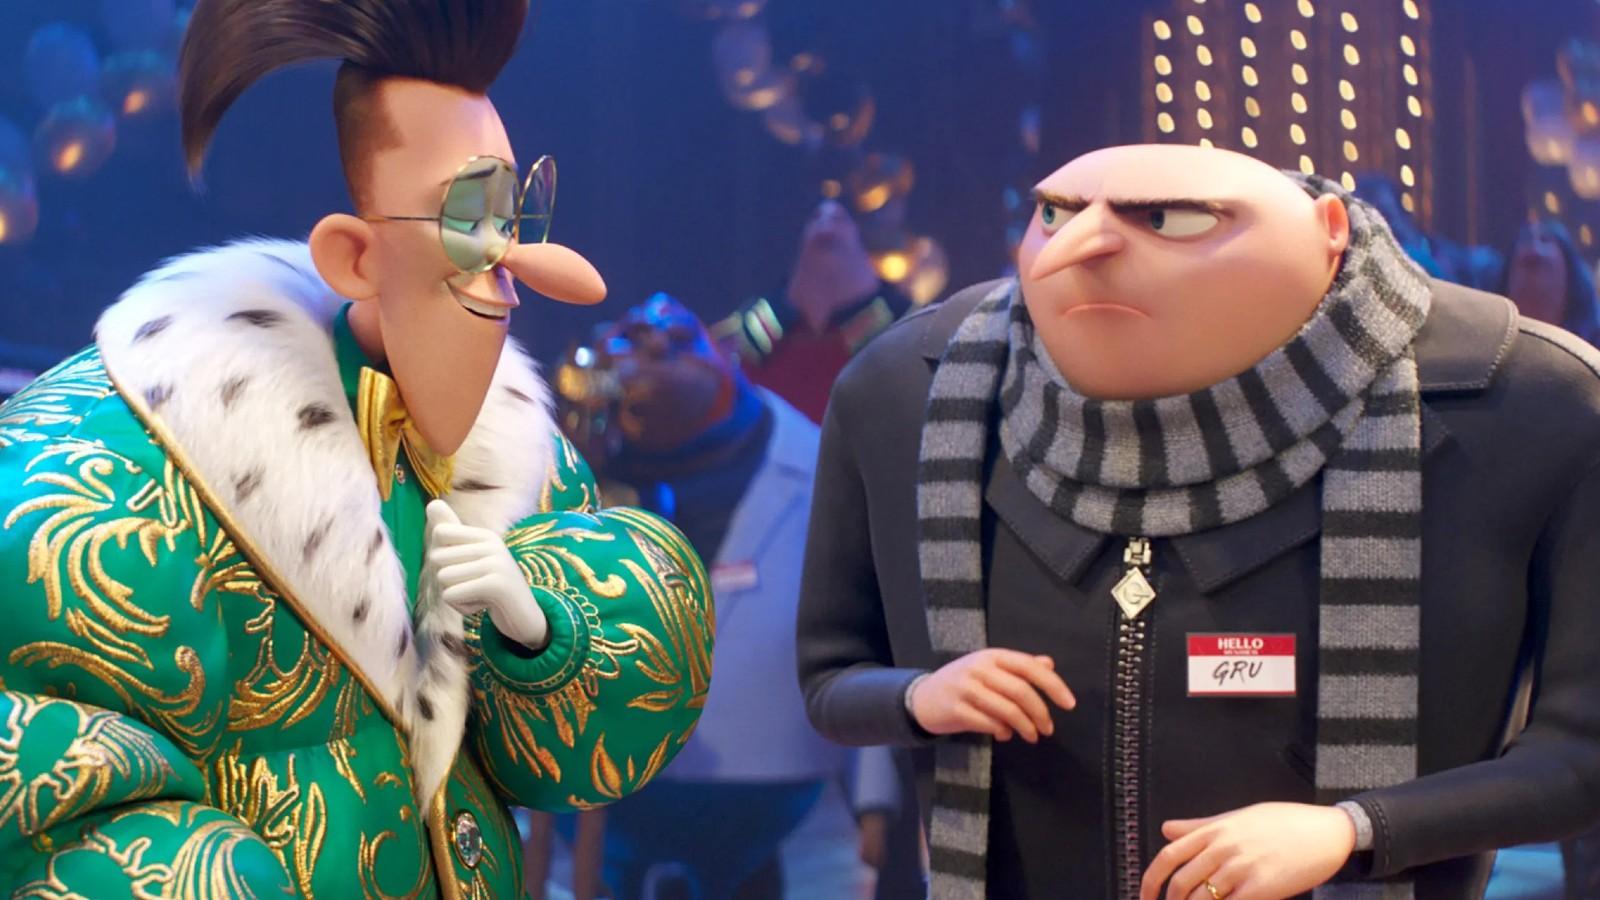 Gru chatting to a guy in a big green coat in Despicable Me 4.